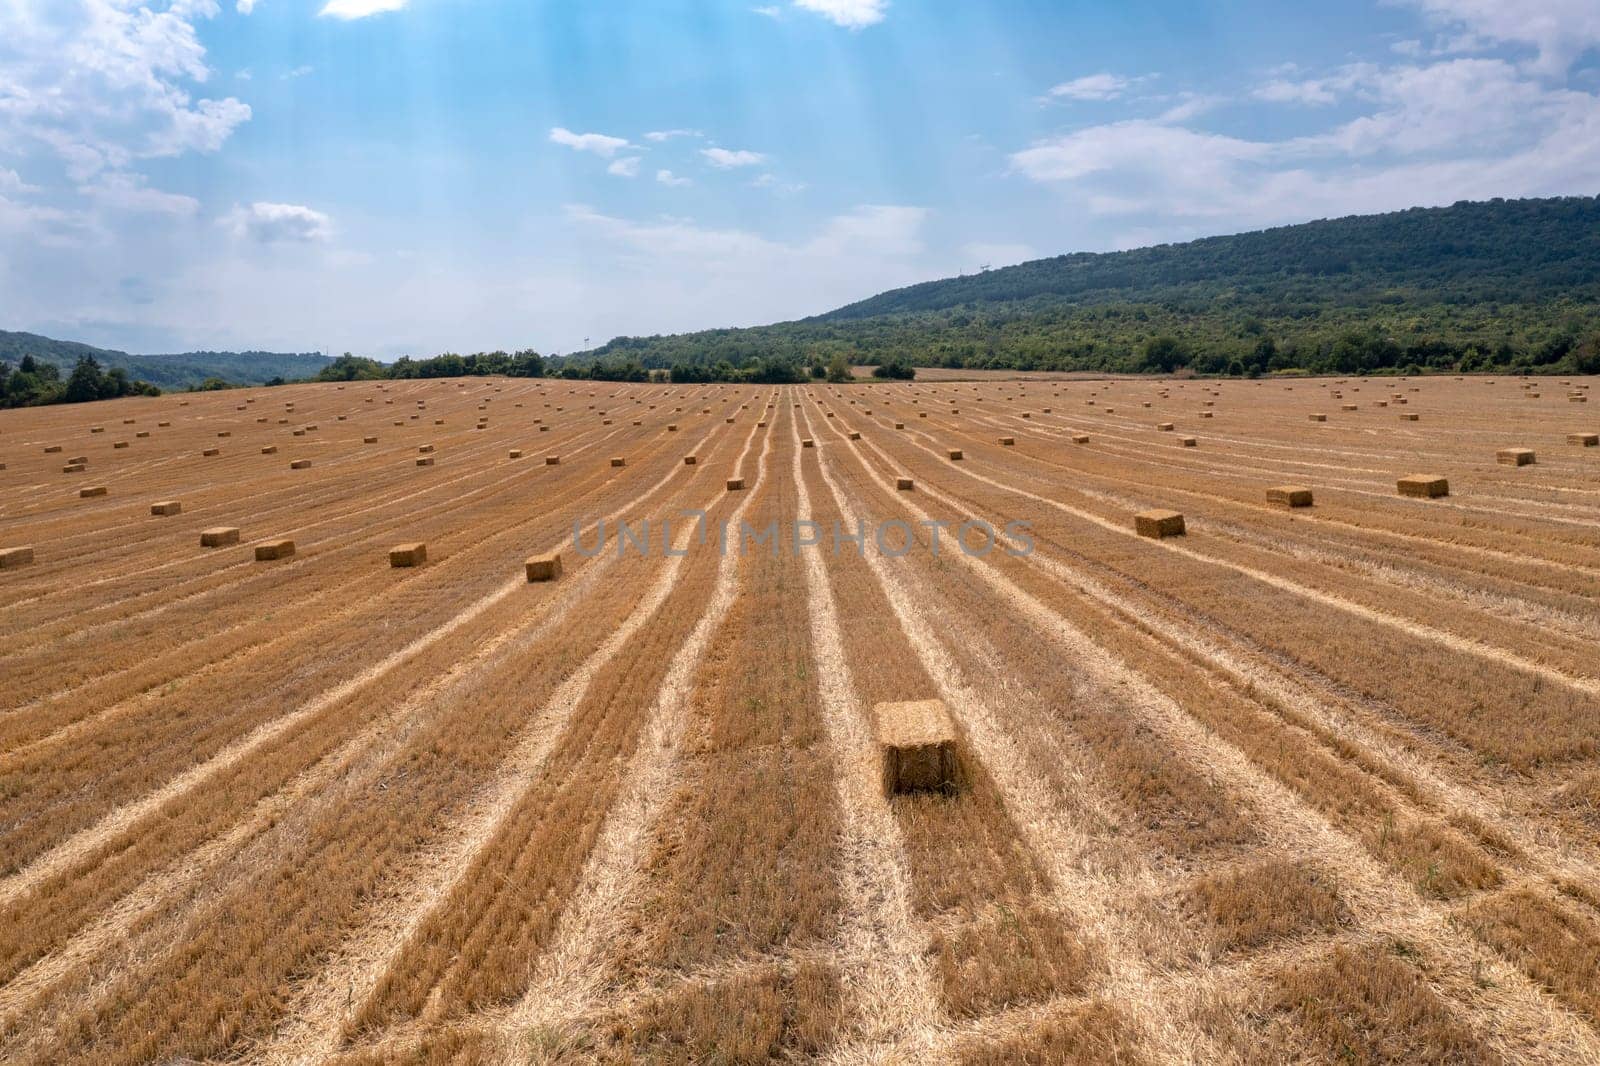 Scenic view of hay bales on the field after harvest. by EdVal